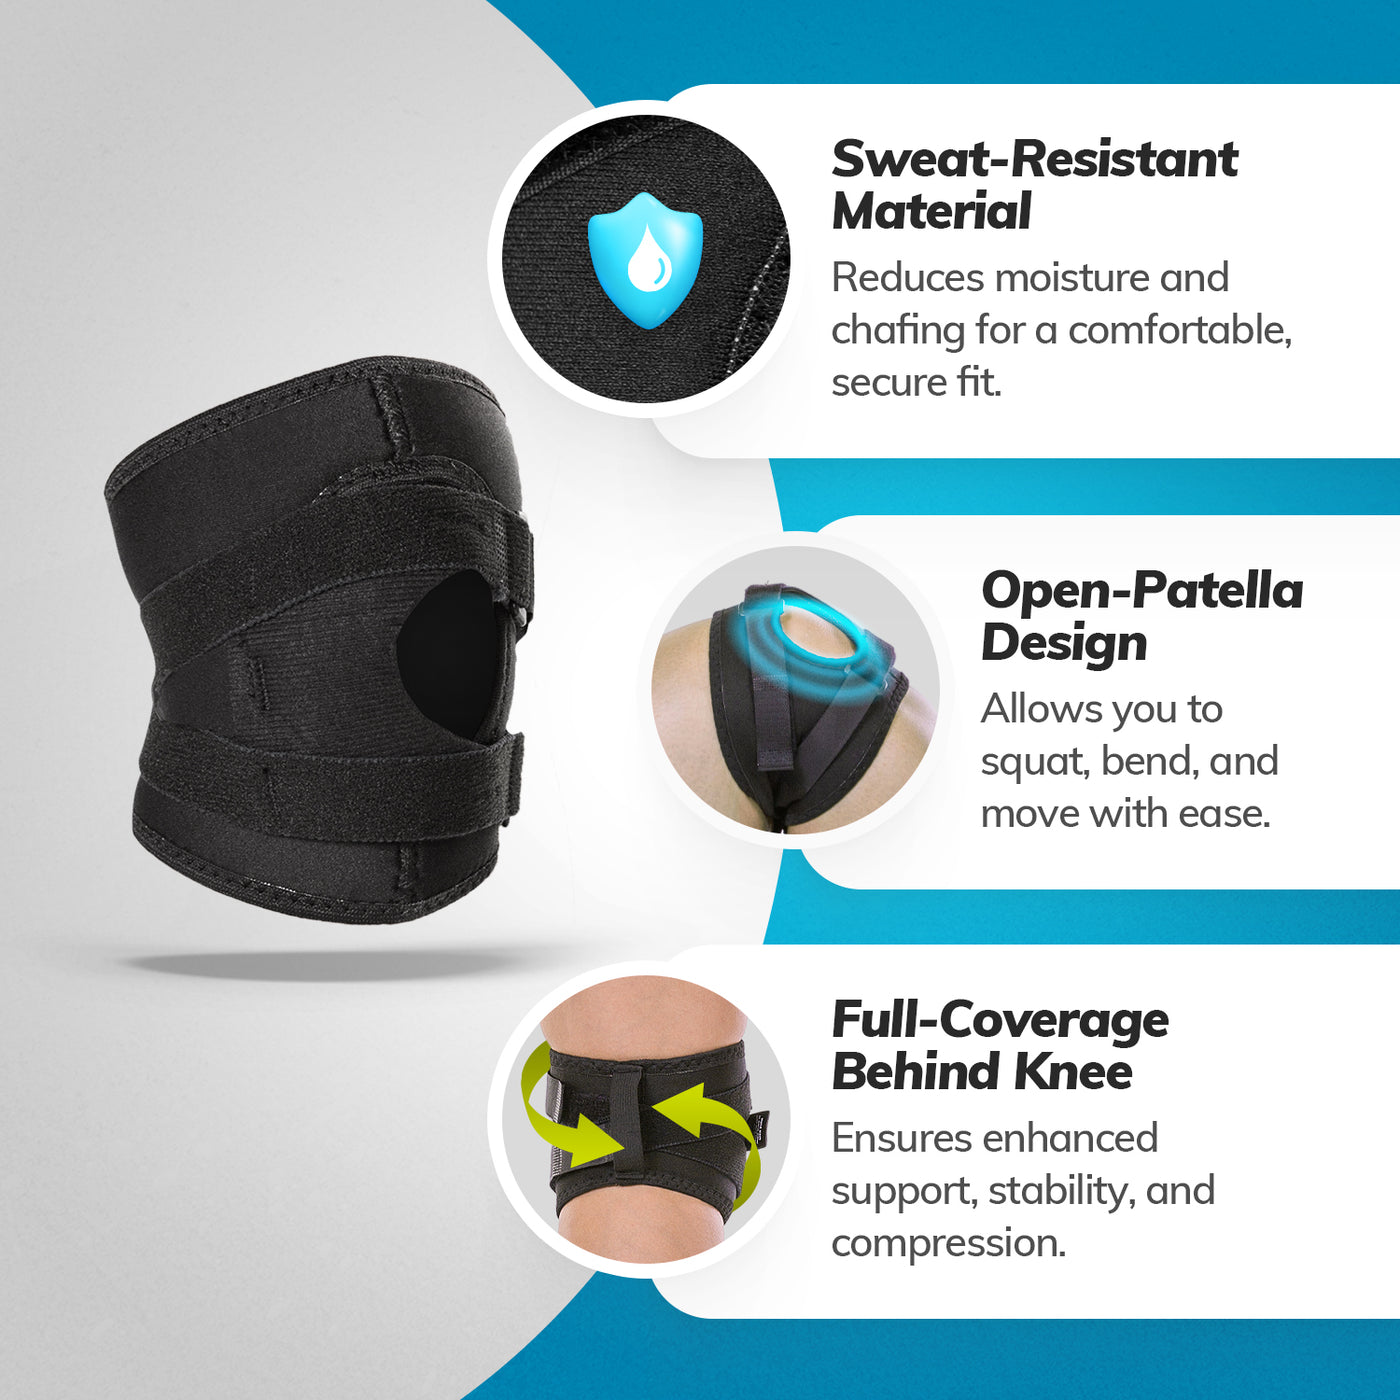 The dislocated knee brace by BraceAbility is made of breathable material making it perfect for working out